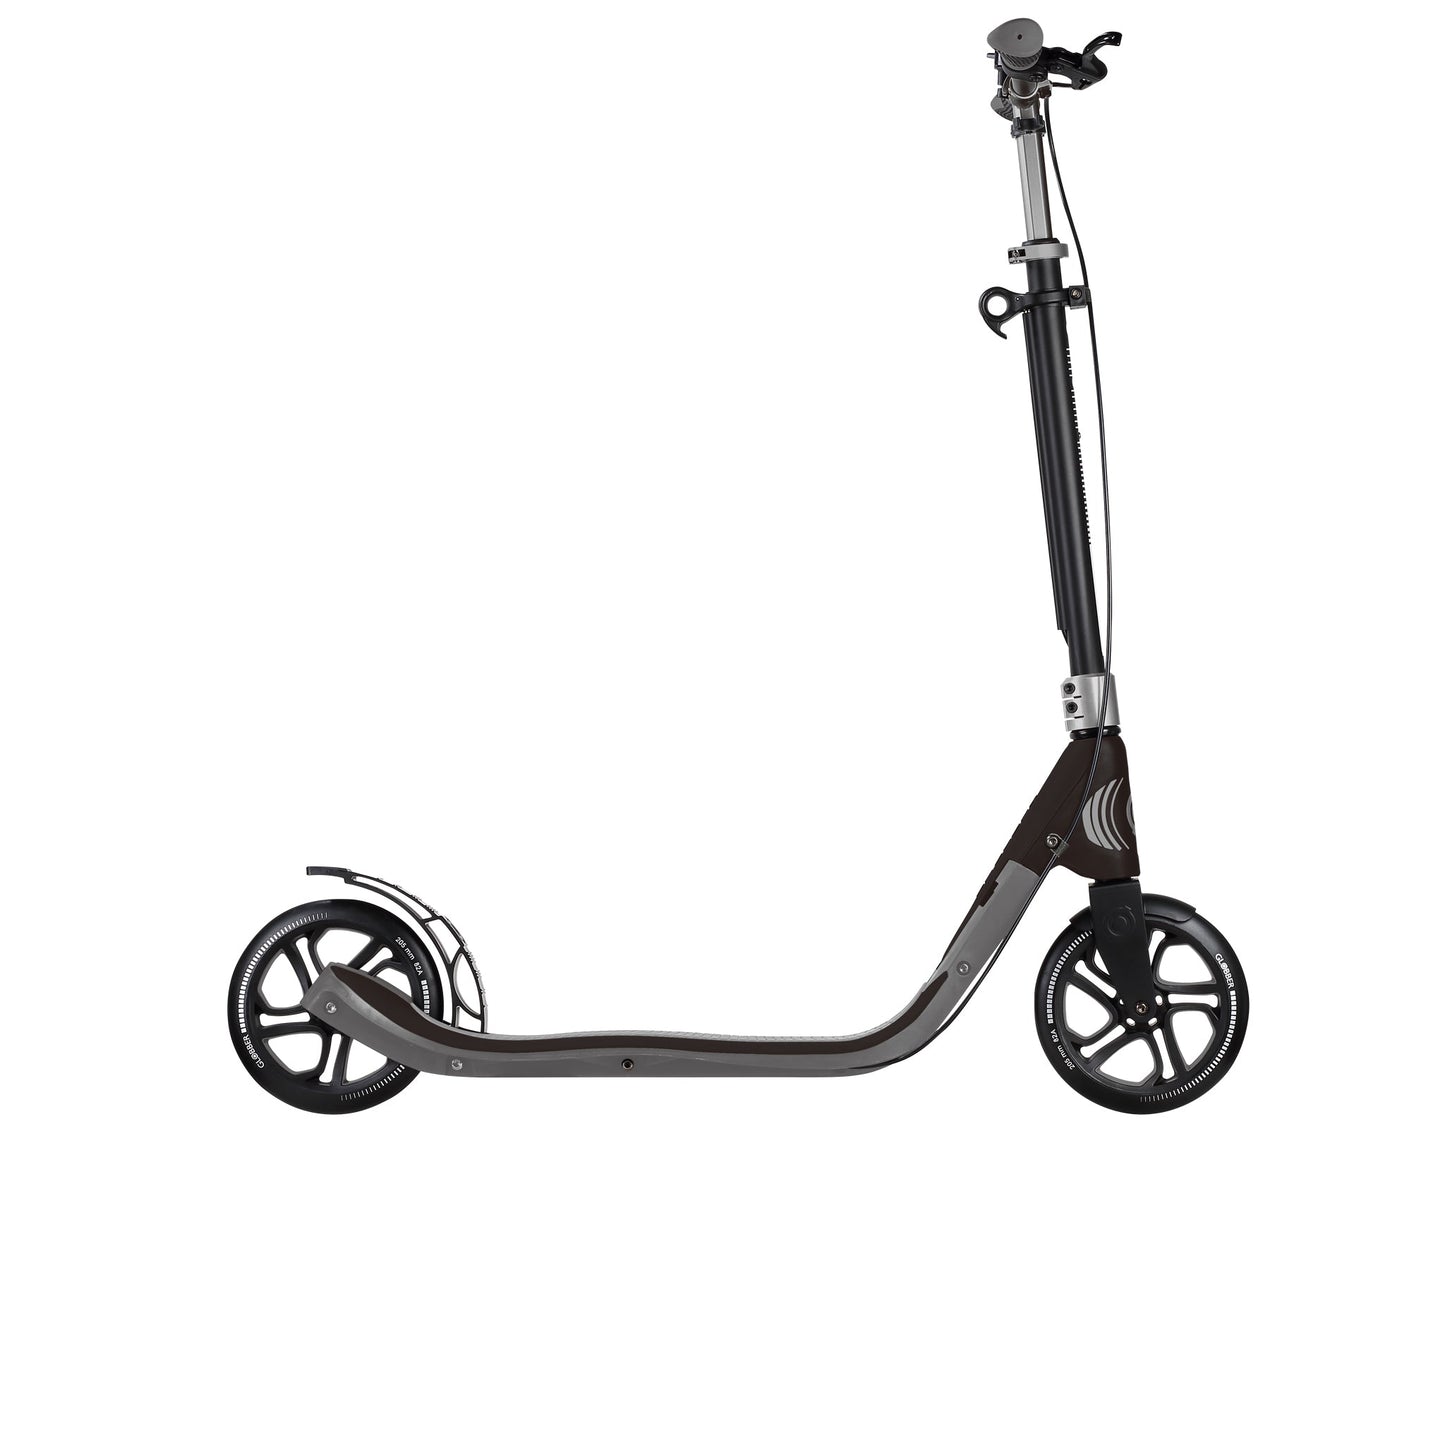 One NL 205 Deluxe: 2-Wheel Foldable Scooter with Handbrake and Bell for Teens and Adults - Titanium/Charcoal Grey